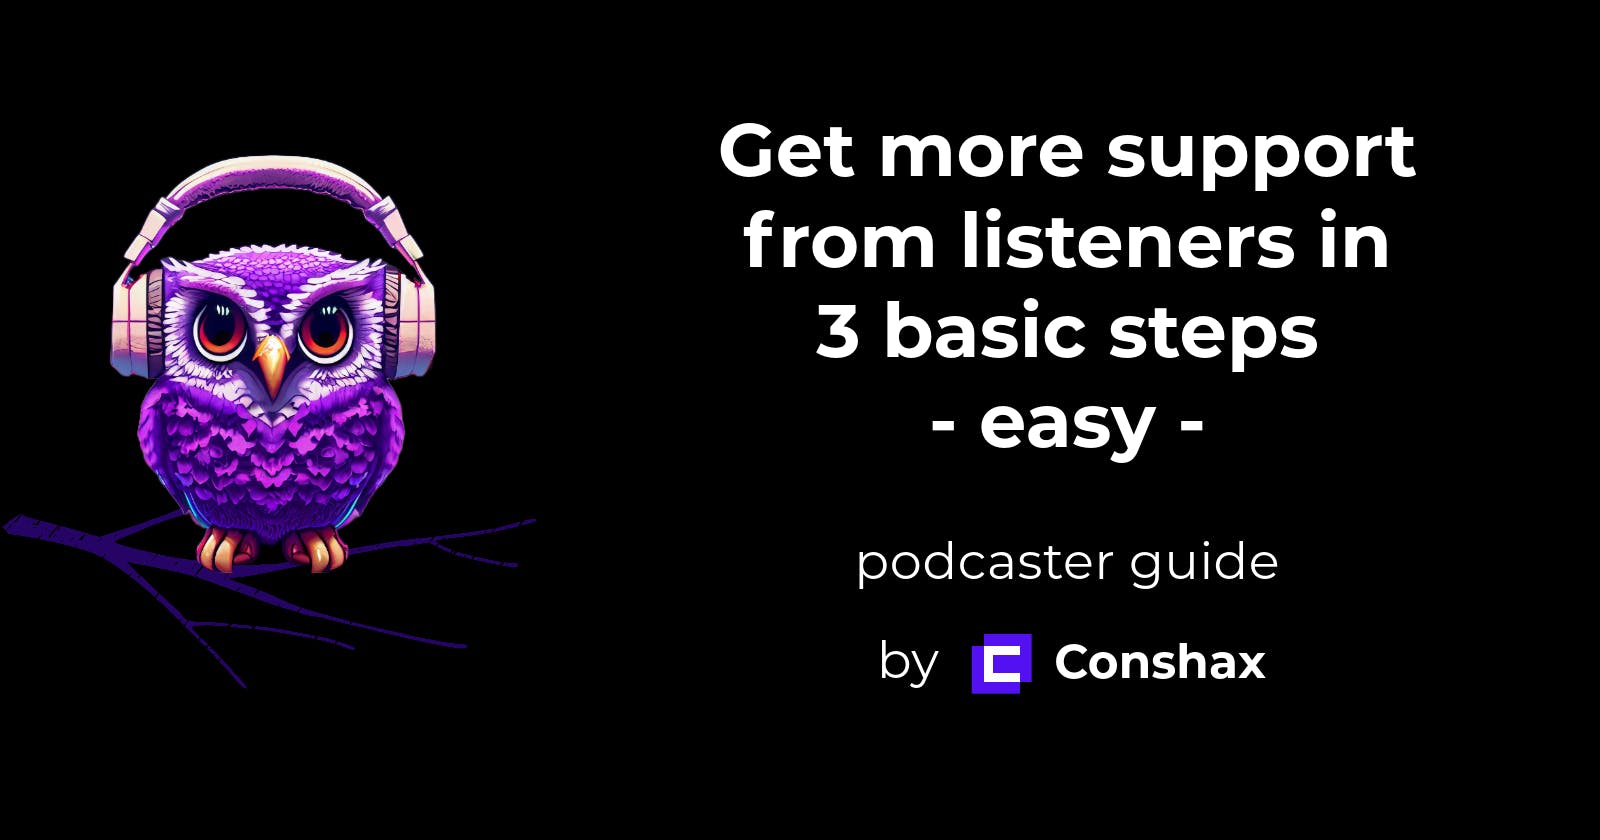 Short and practical advice to increase the support you get from listeners.